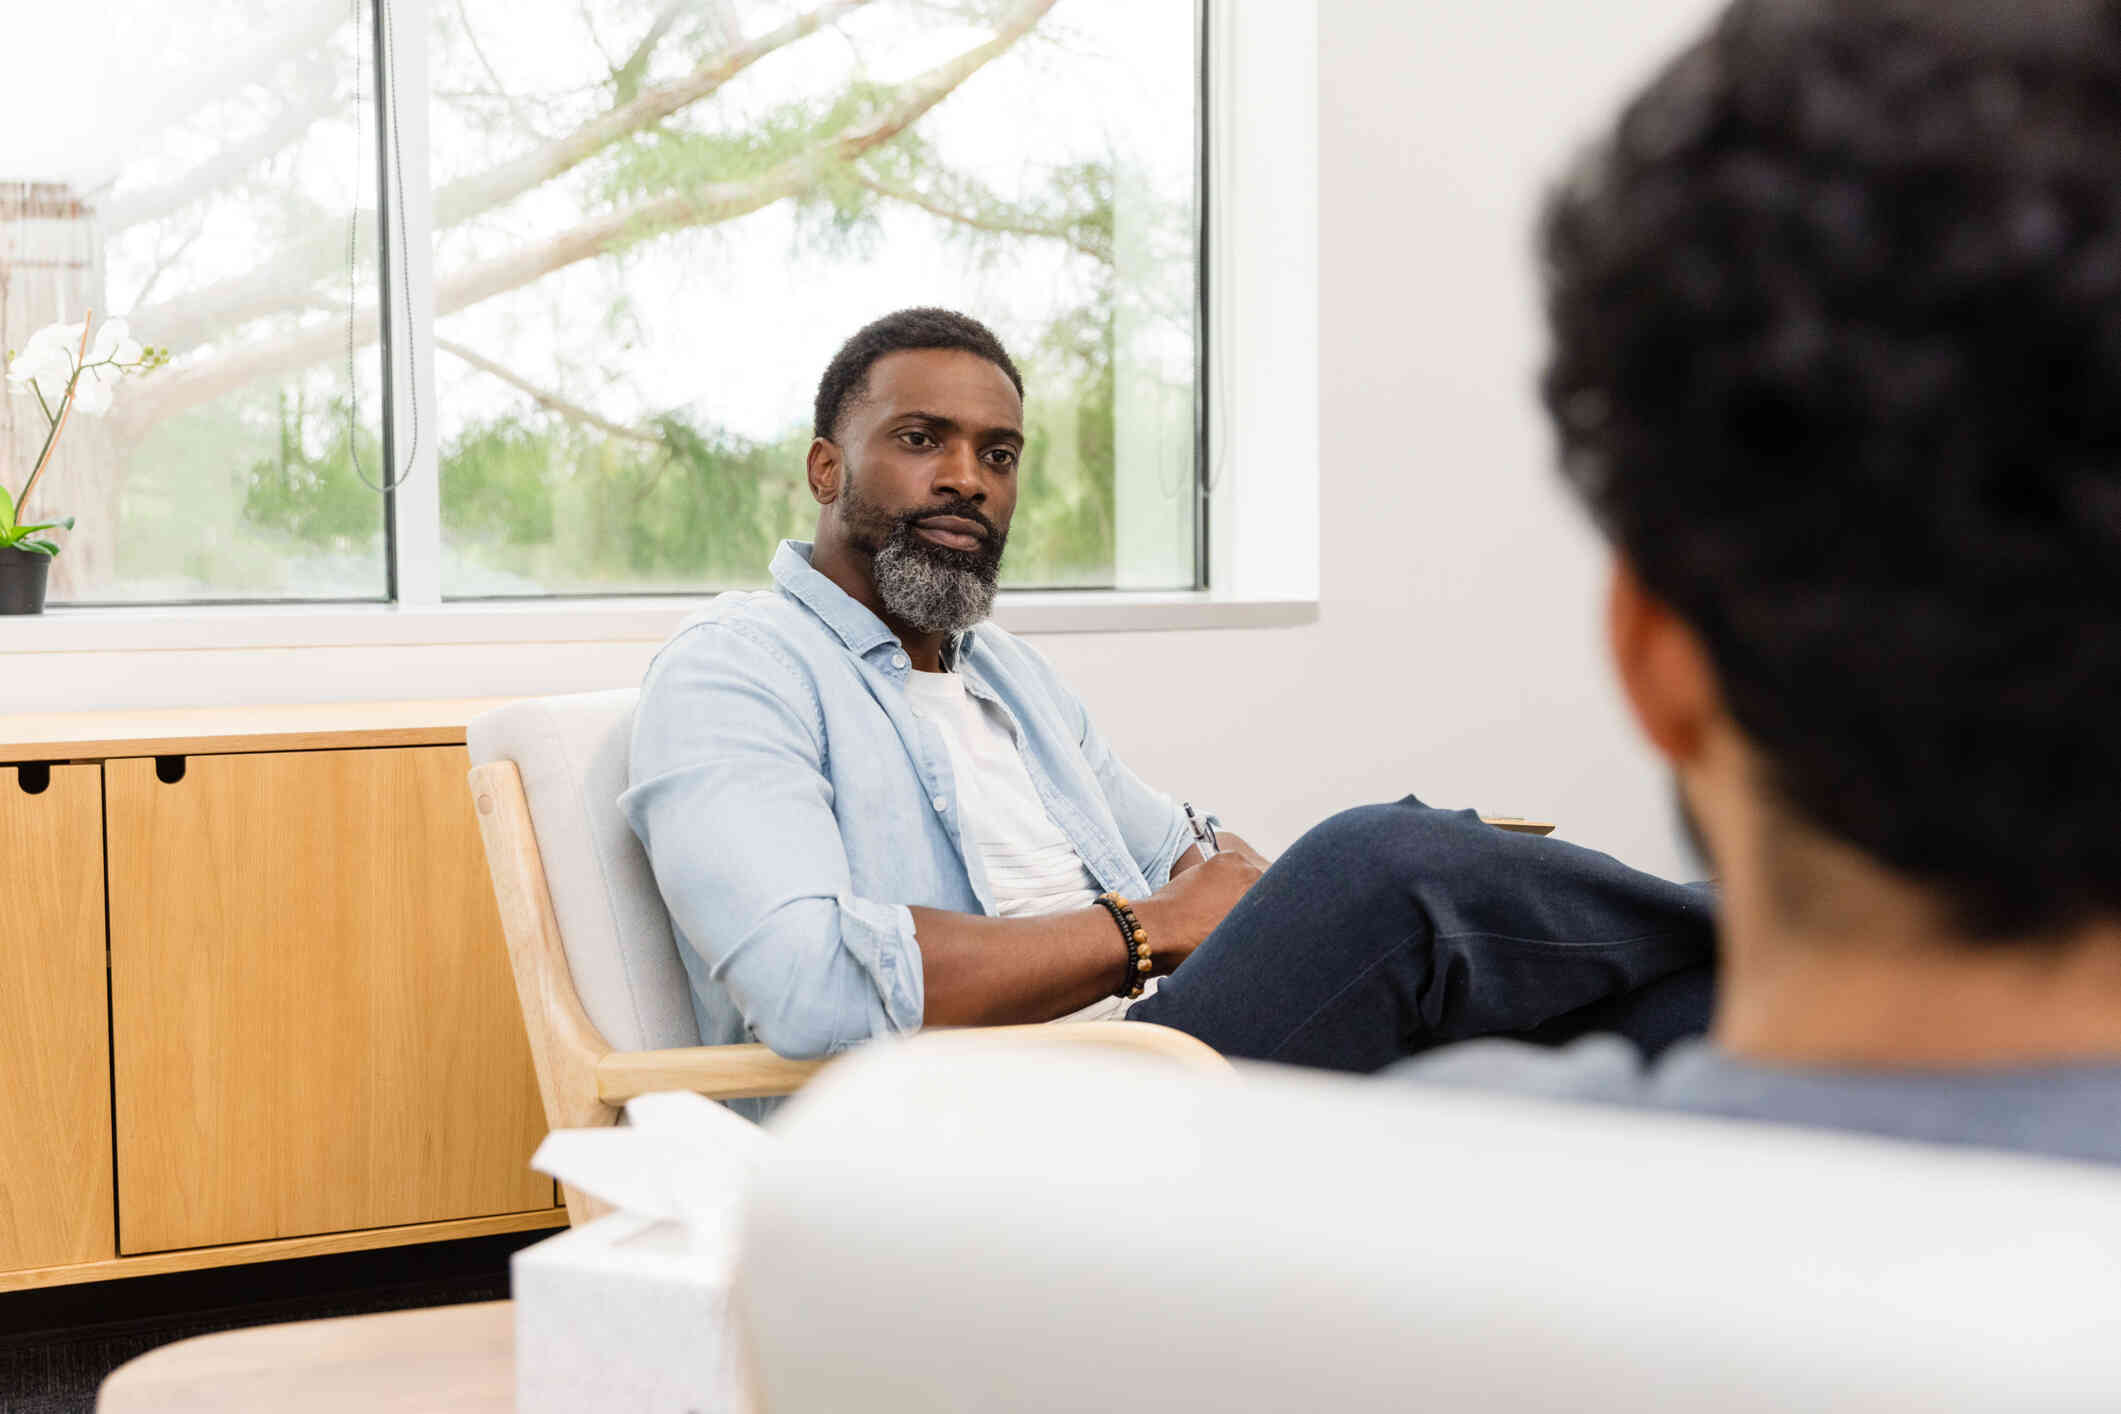 A male therapist listens intently to the male patient sitting across from him during a therapy session.